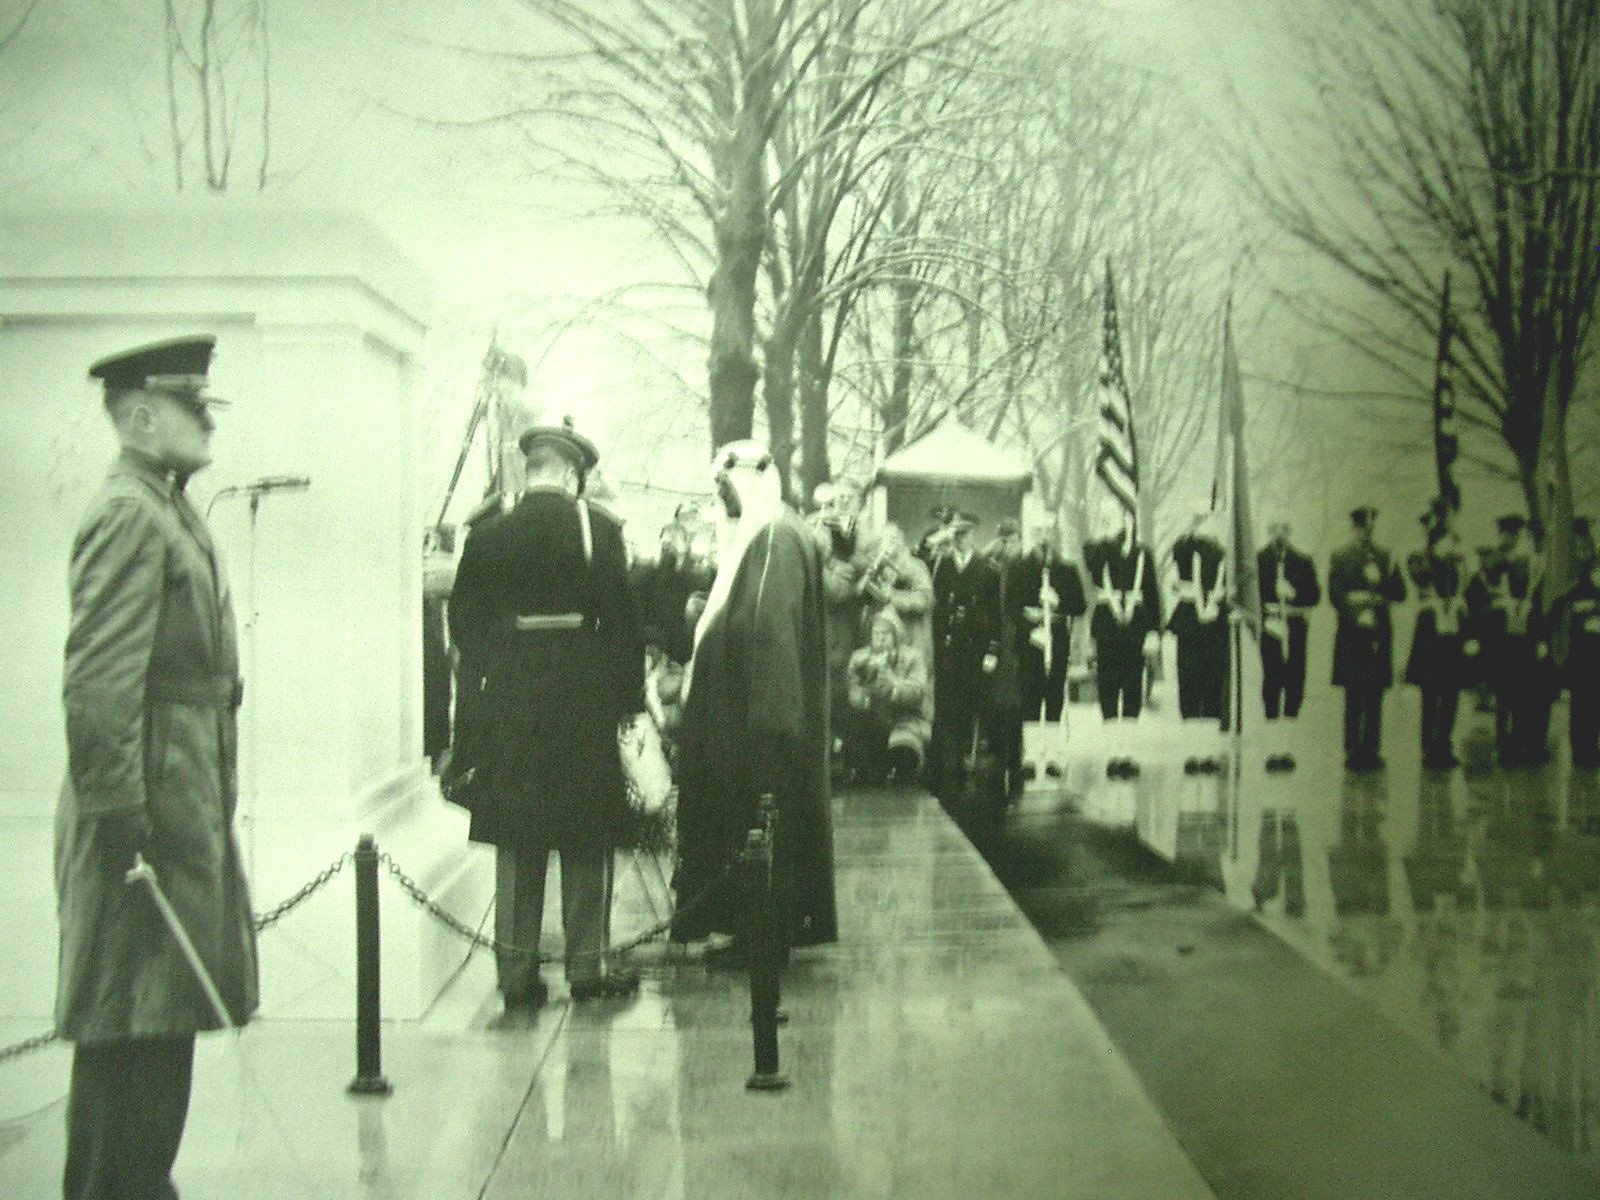 HRH King Saud places a wreath over the Grave of the Unknown Soldier - Arlington Cemetery 